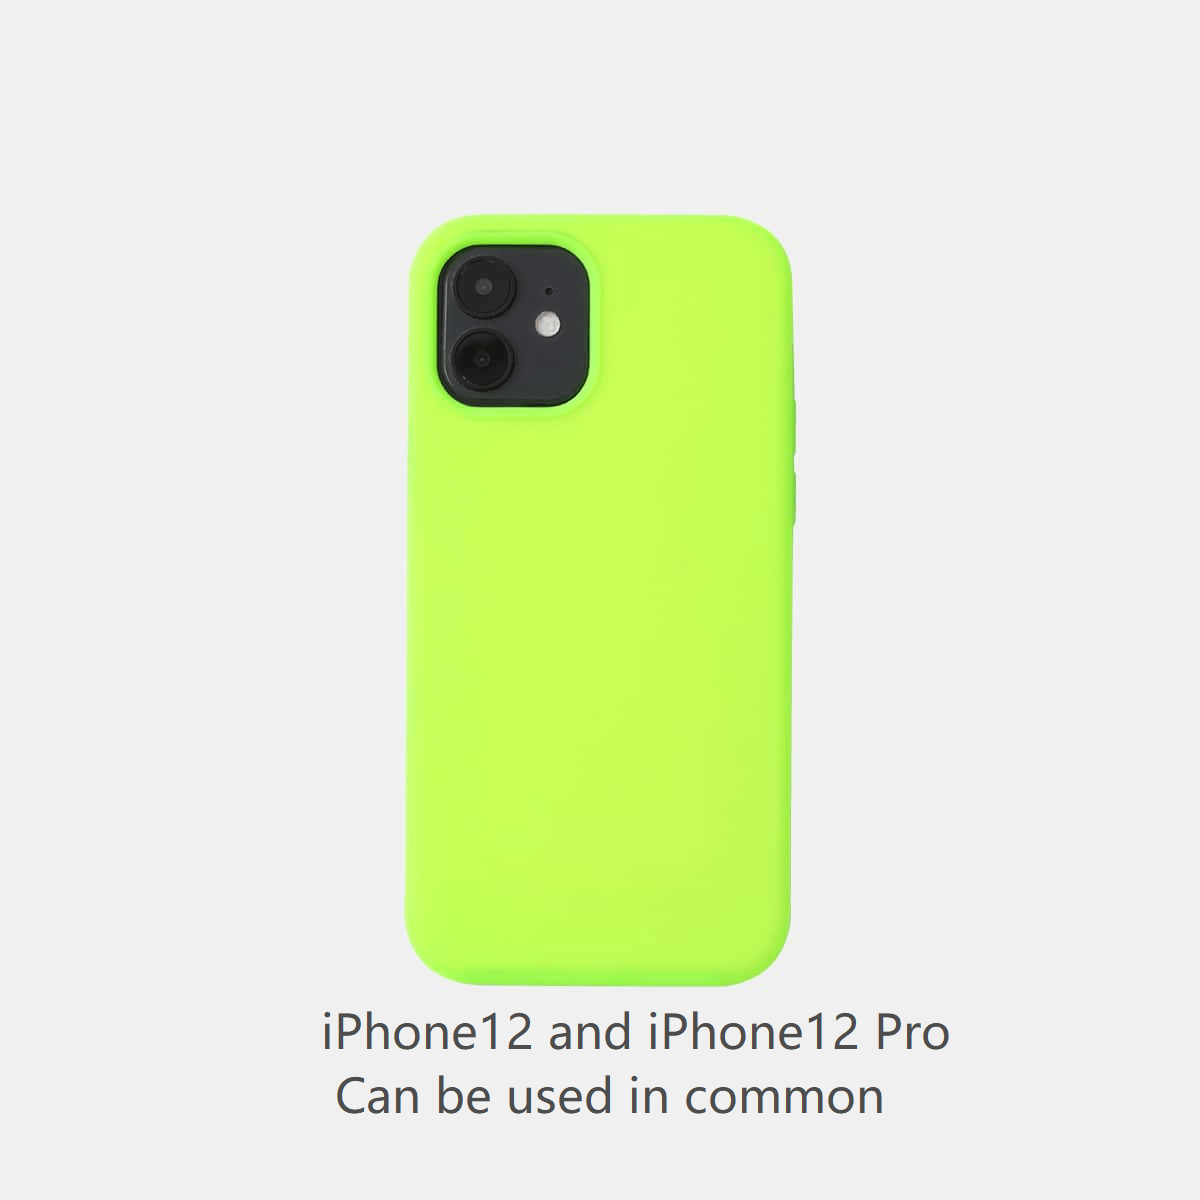 Neon Green iPhone Case for iPhone 13, 13 Pro Max Case, iPhone 12, iPhone 12  Pro, iPhone 12 Pro Max Case / Silicone Neon Green iPhone Case 